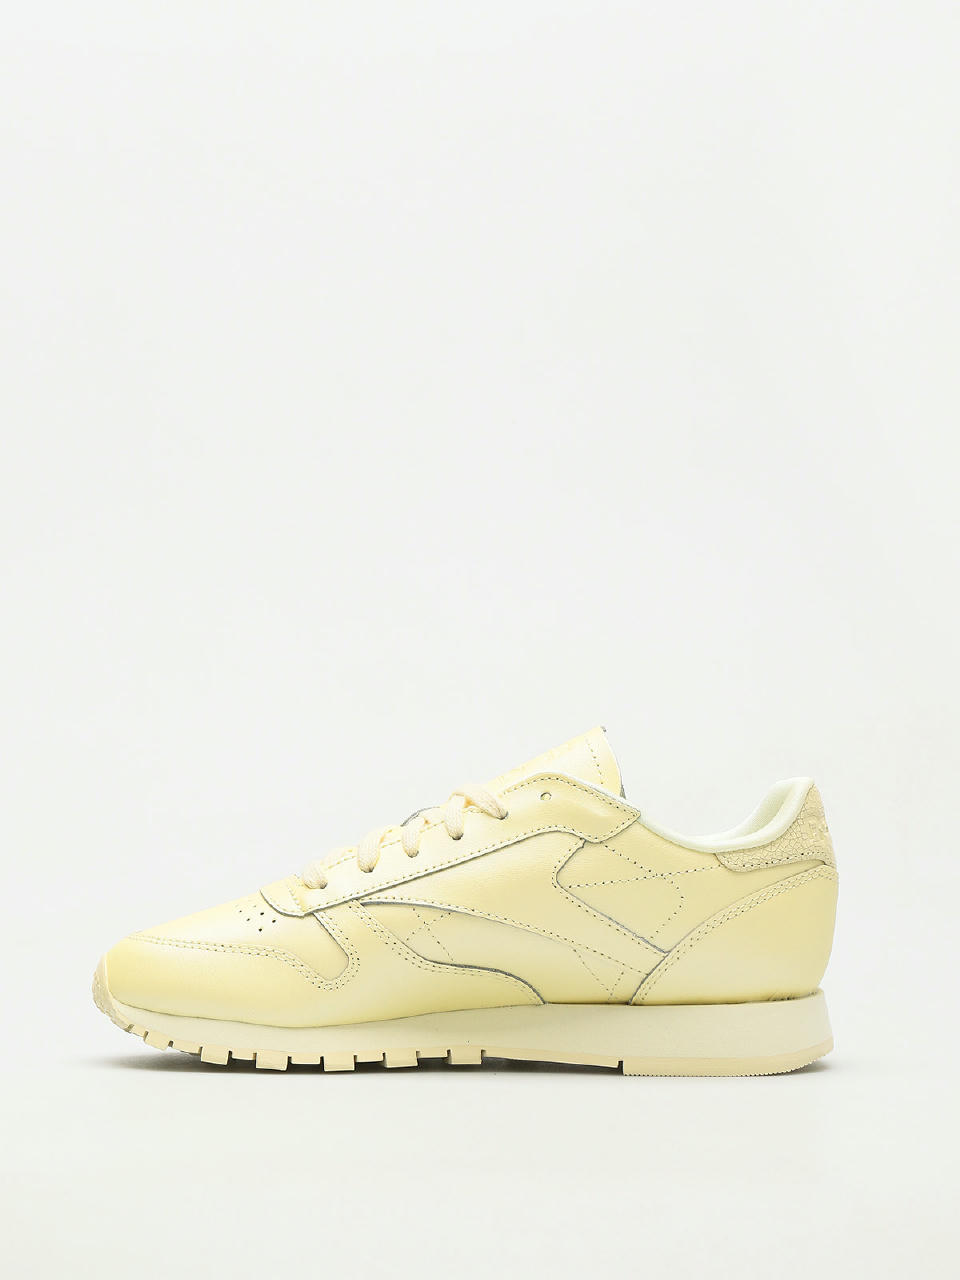 Reebok Leather Wmn washed yellow)